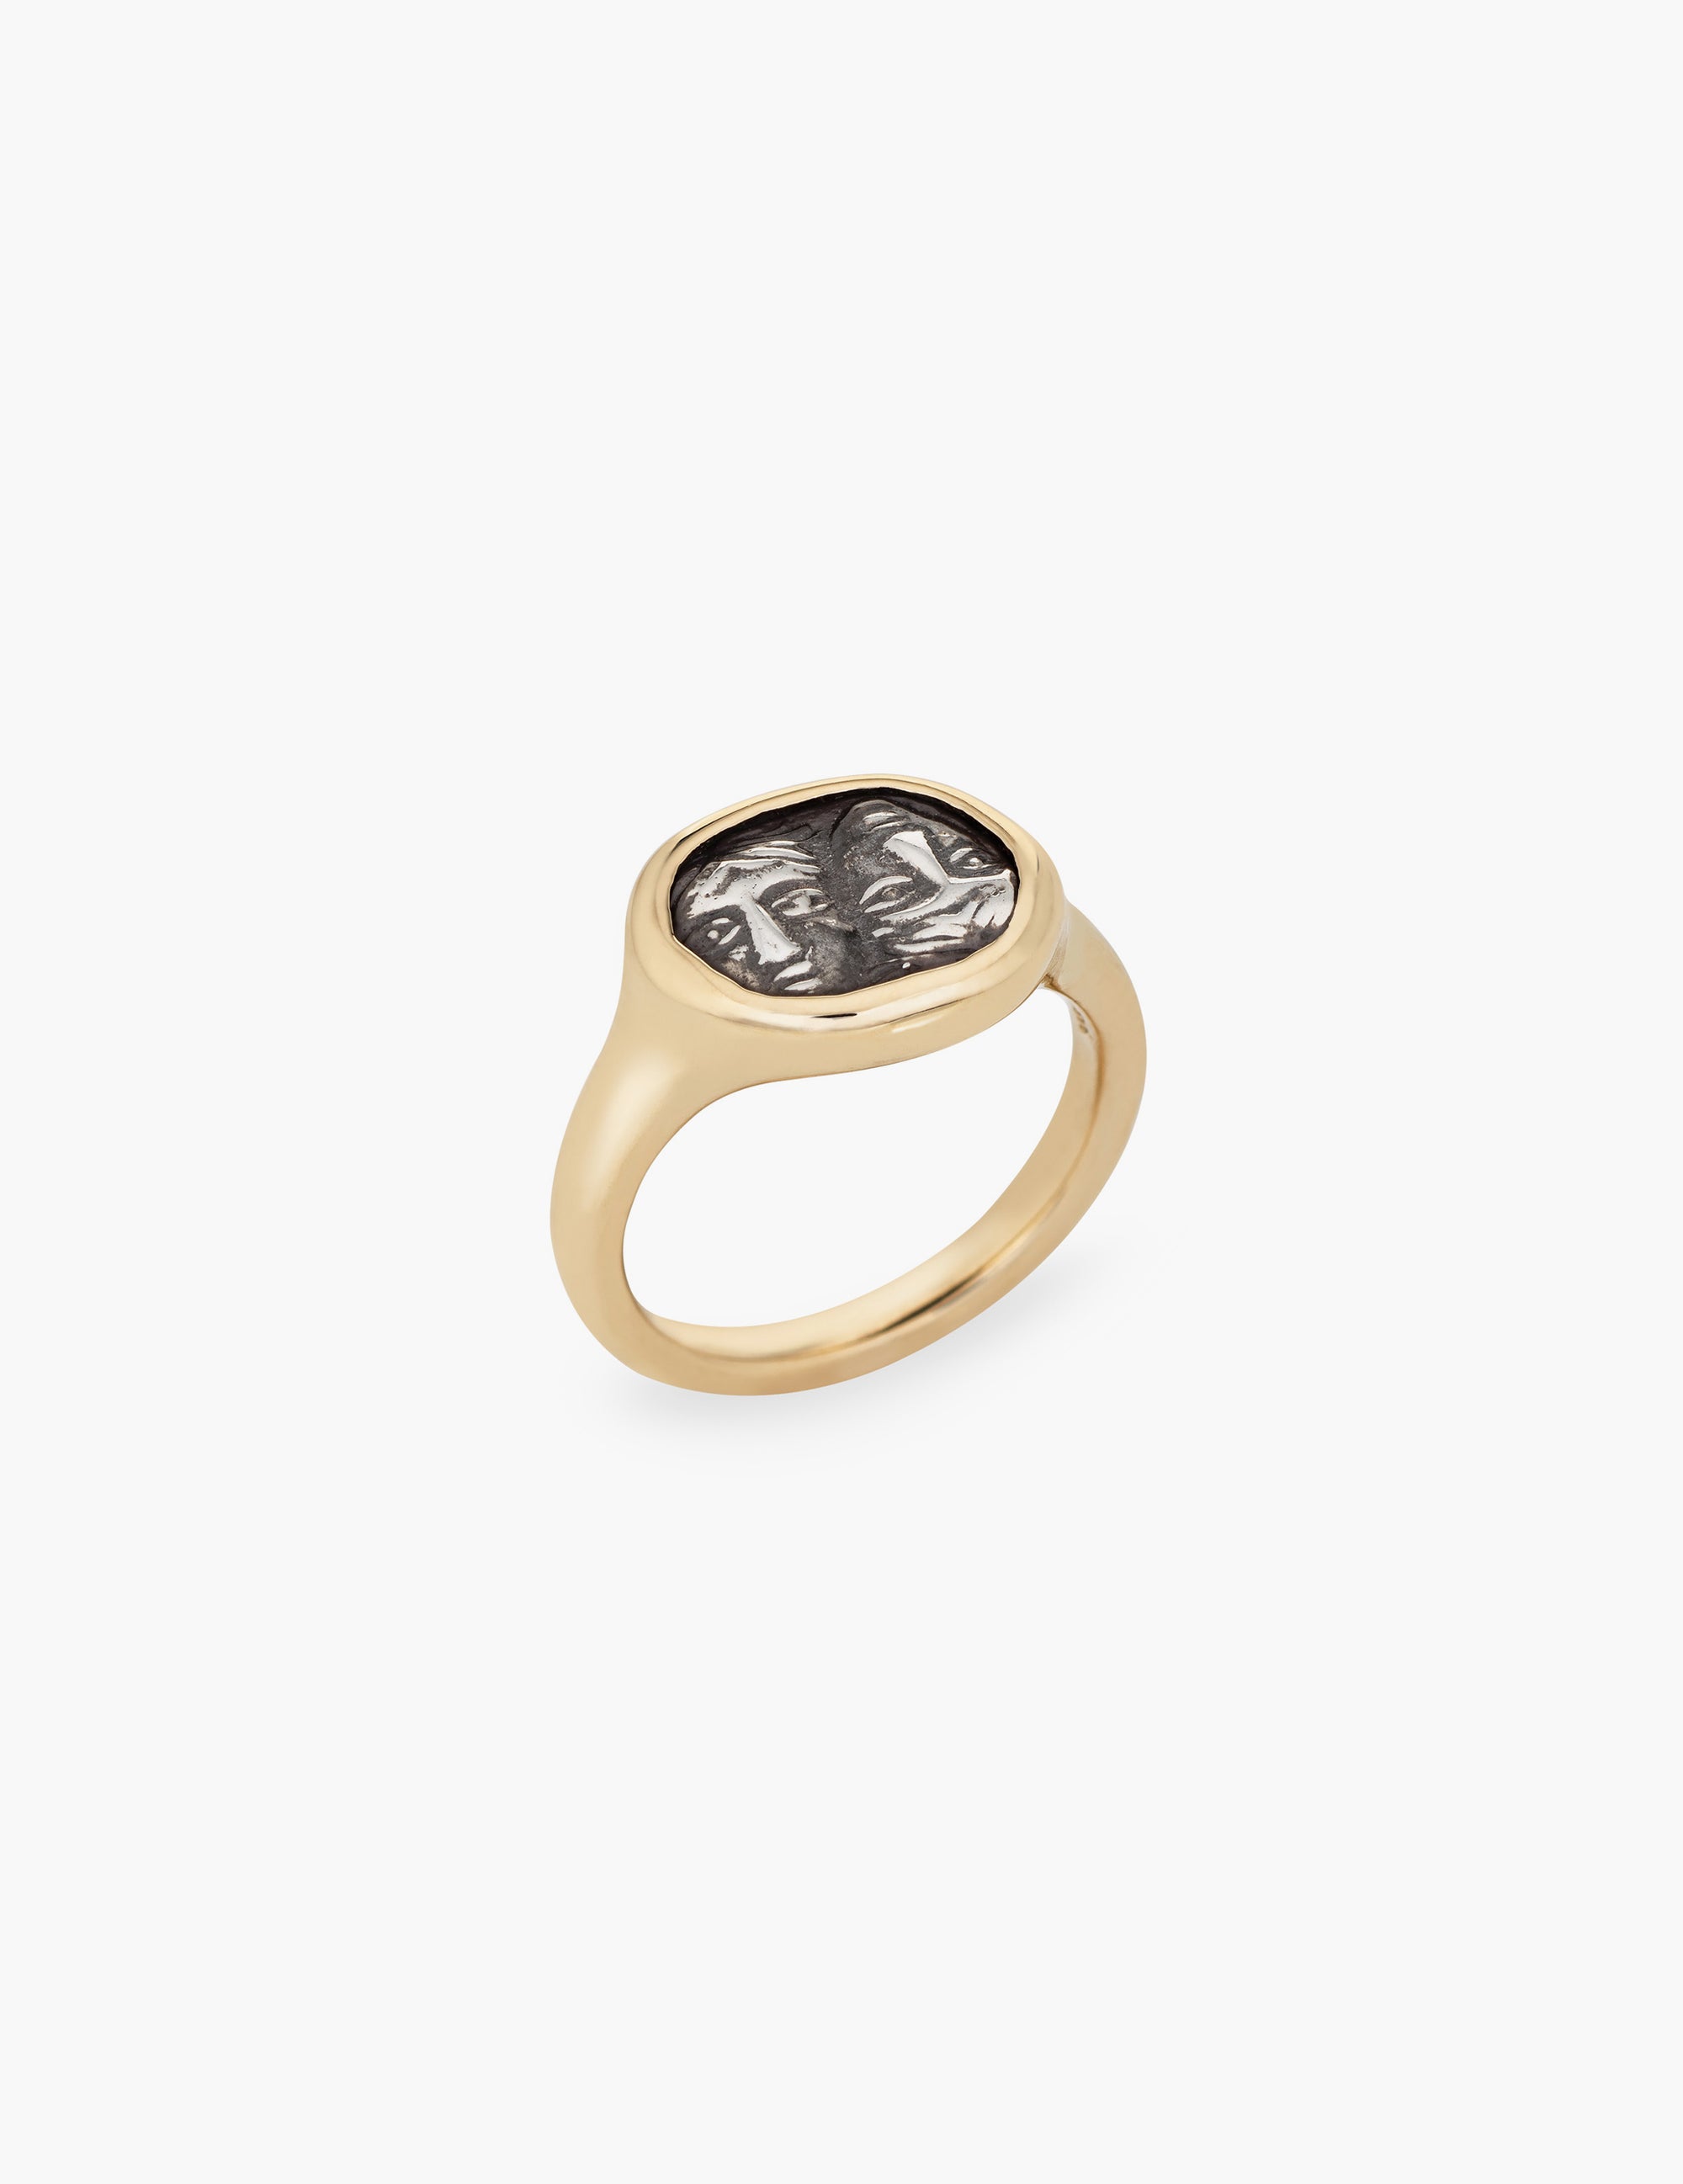 Gemini Coin Ring in Gold and Sterling Silver